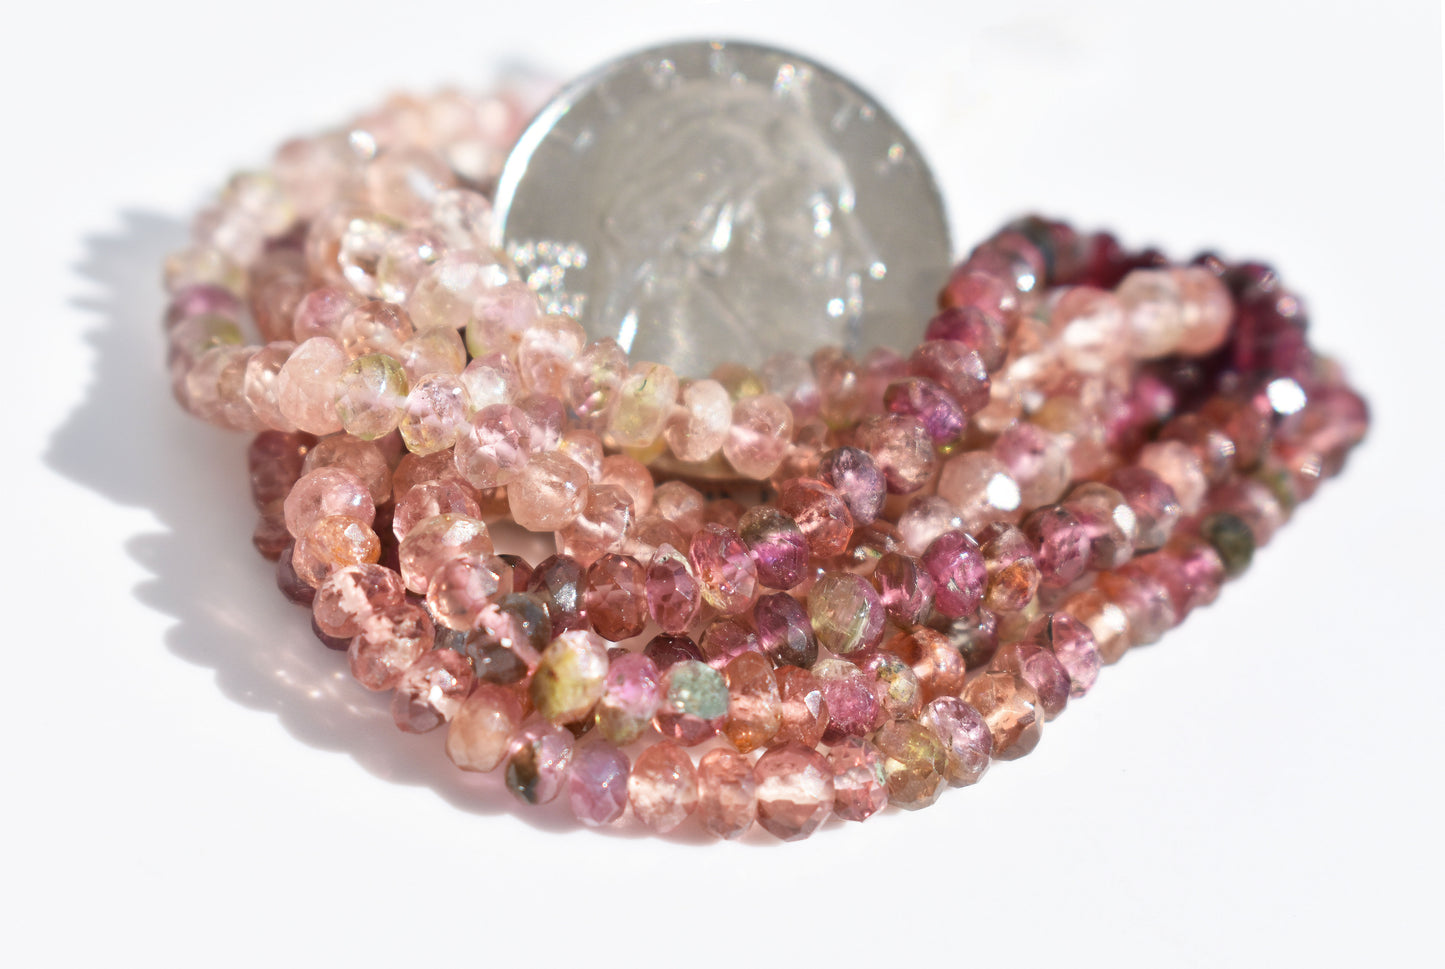 Ombre Tourmaline Pink Rondelle Beads 3.5-4mm x 2-2.5mm - Orange & Grey-Blue Inclusions